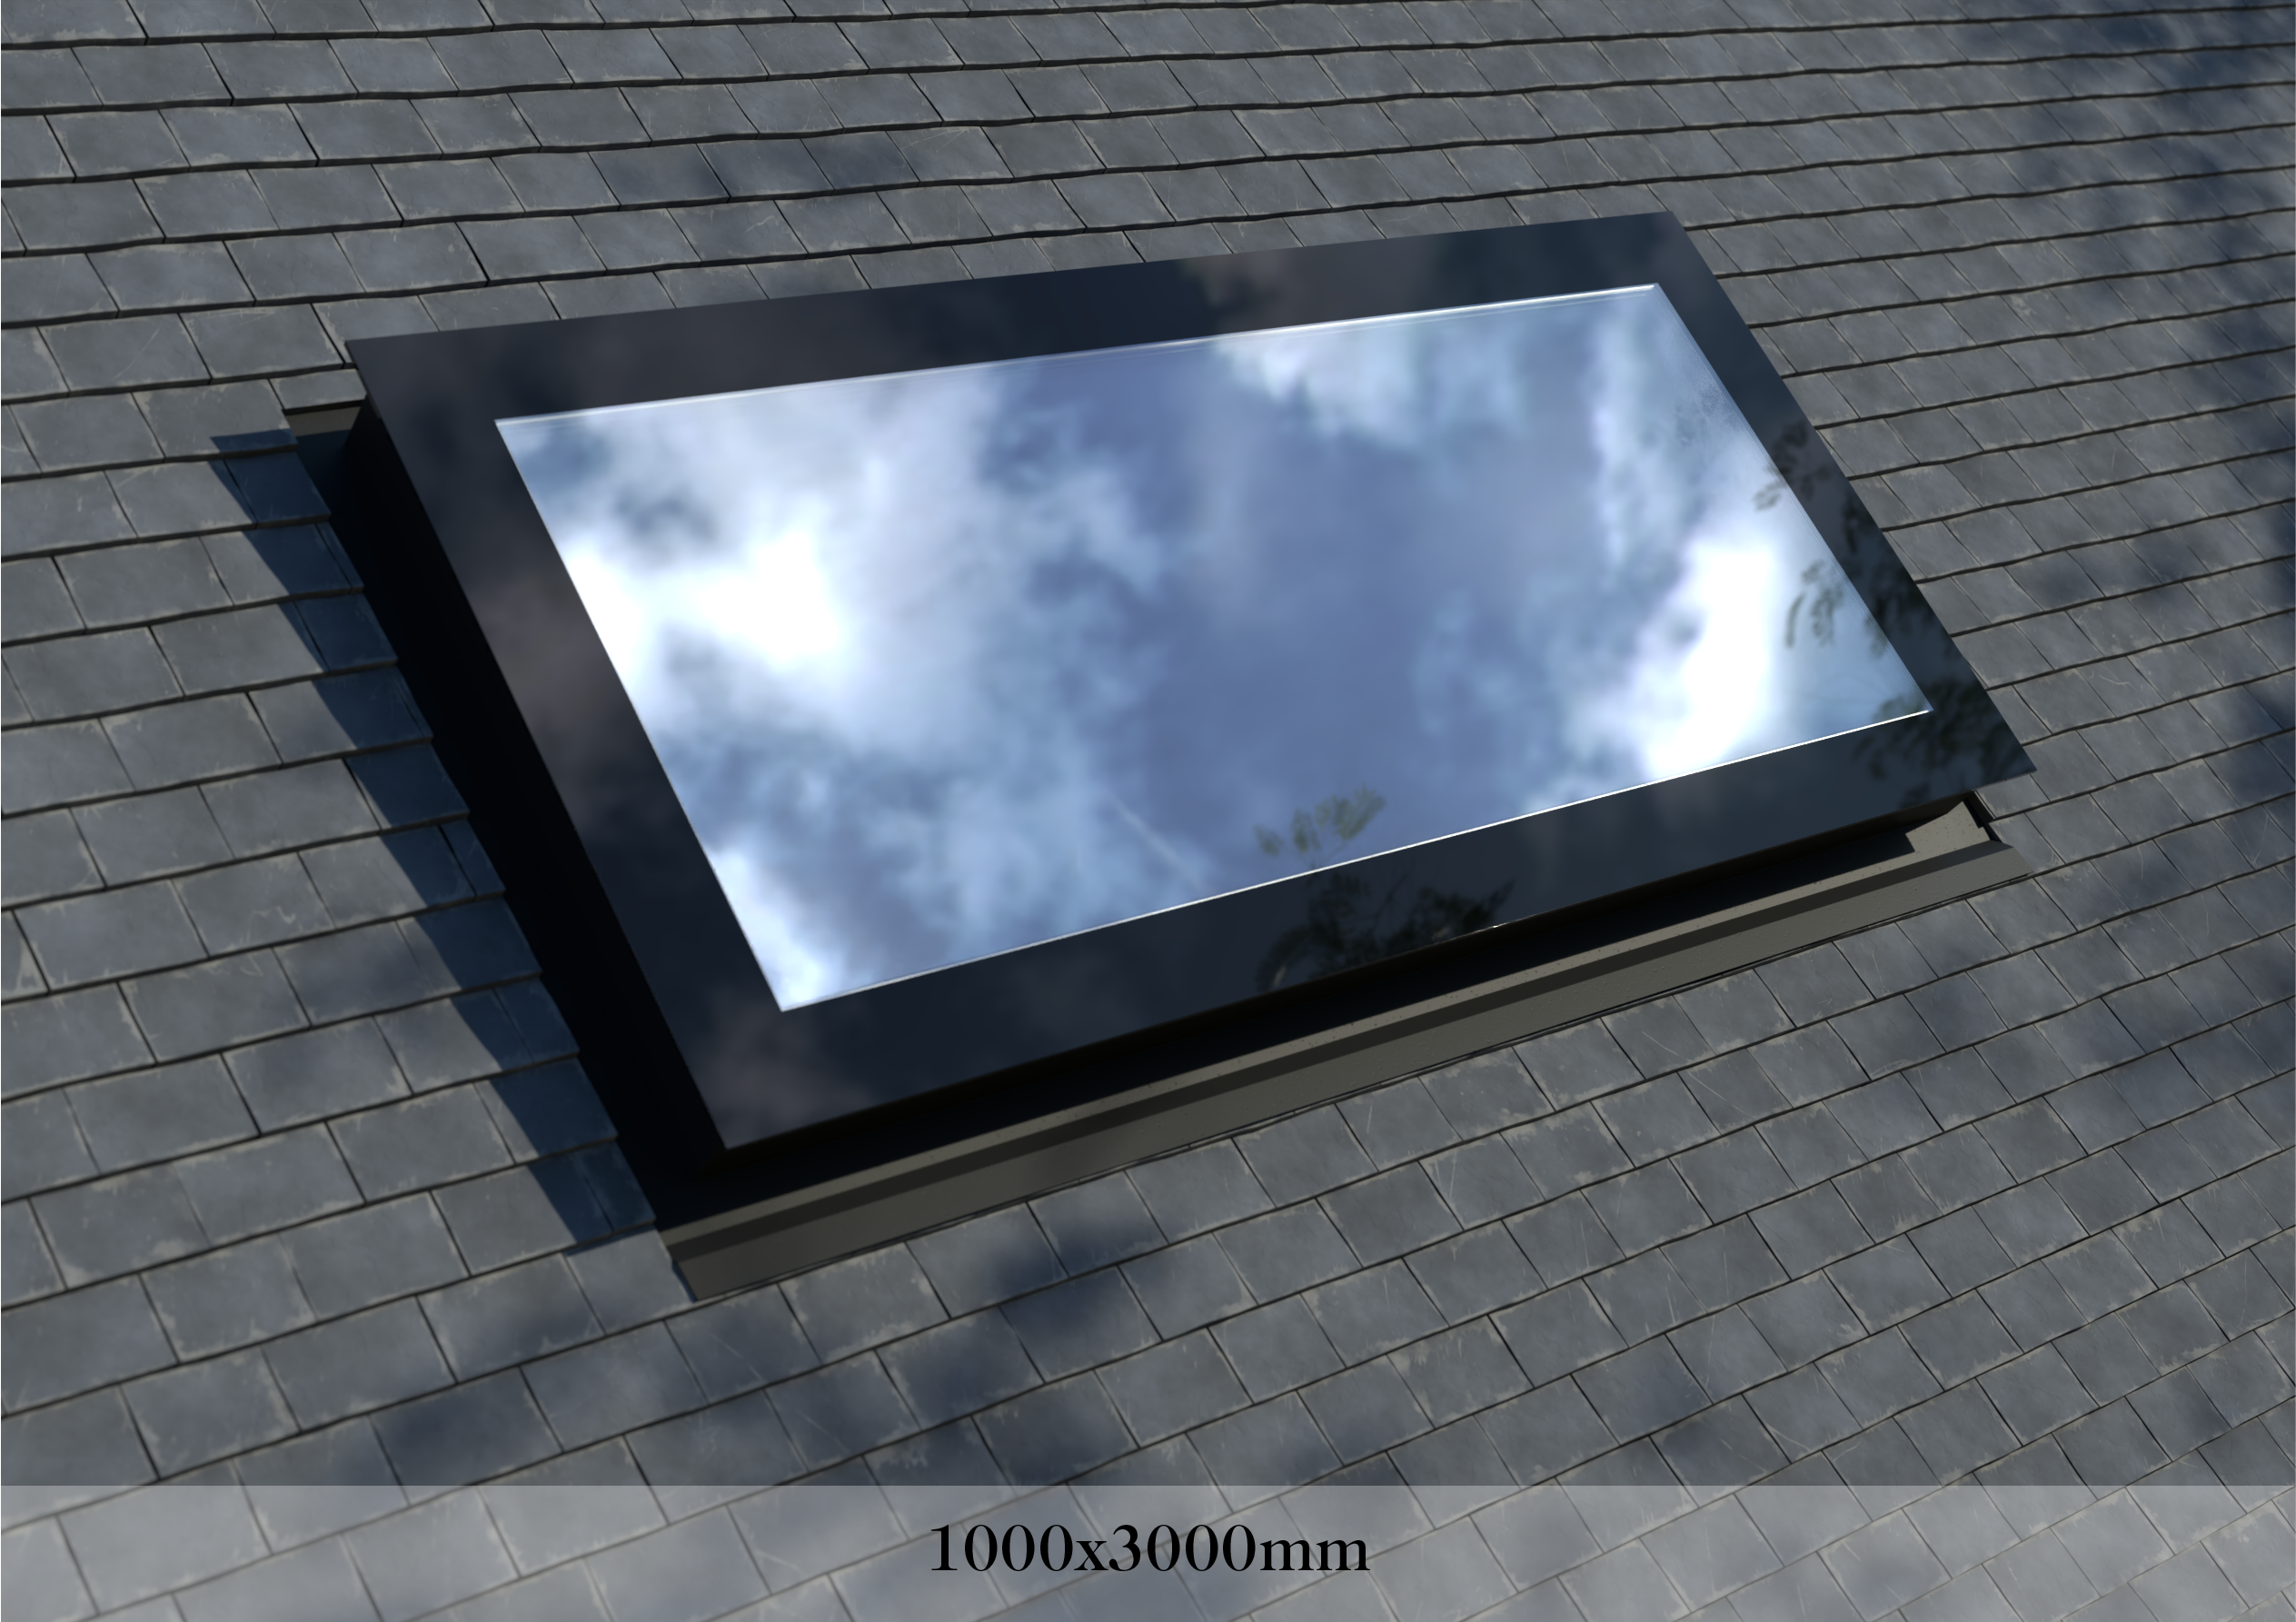 Pitched Roof Skylight 1000 x 3000mm